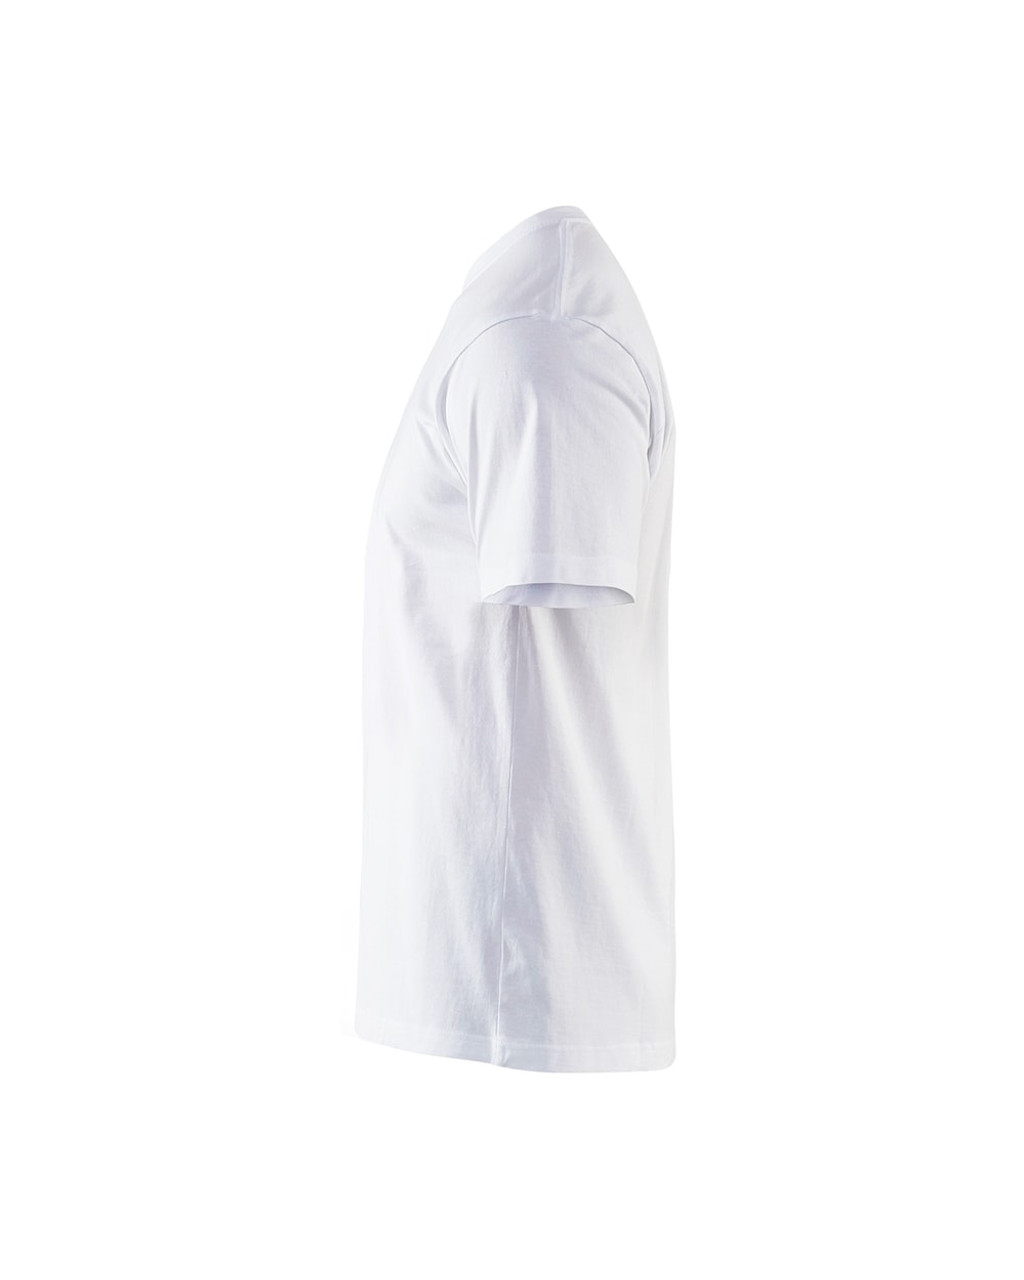 BLAKLADER T-Shirts | Mens 3302 White Classic T-Shirts - 10 Pack for use as  for Mens Shirt, Work Shirts and Branded Polo Shirt